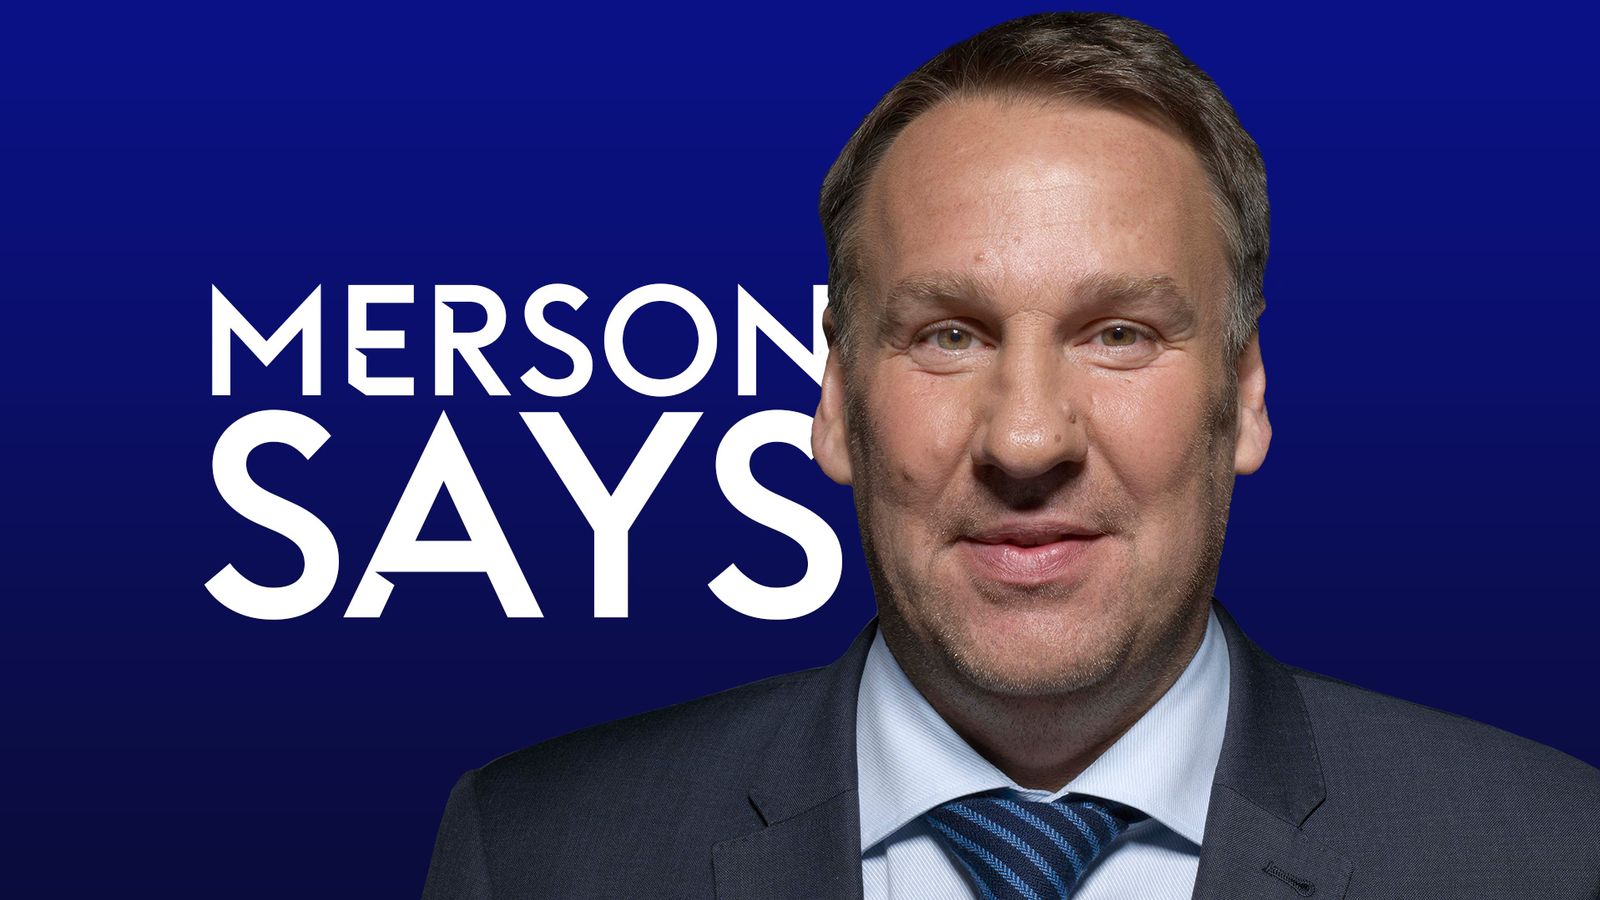 Liverpool have no chance of surpassing Manchester City at the top of the Premier League, says Paul Merson |  Football news